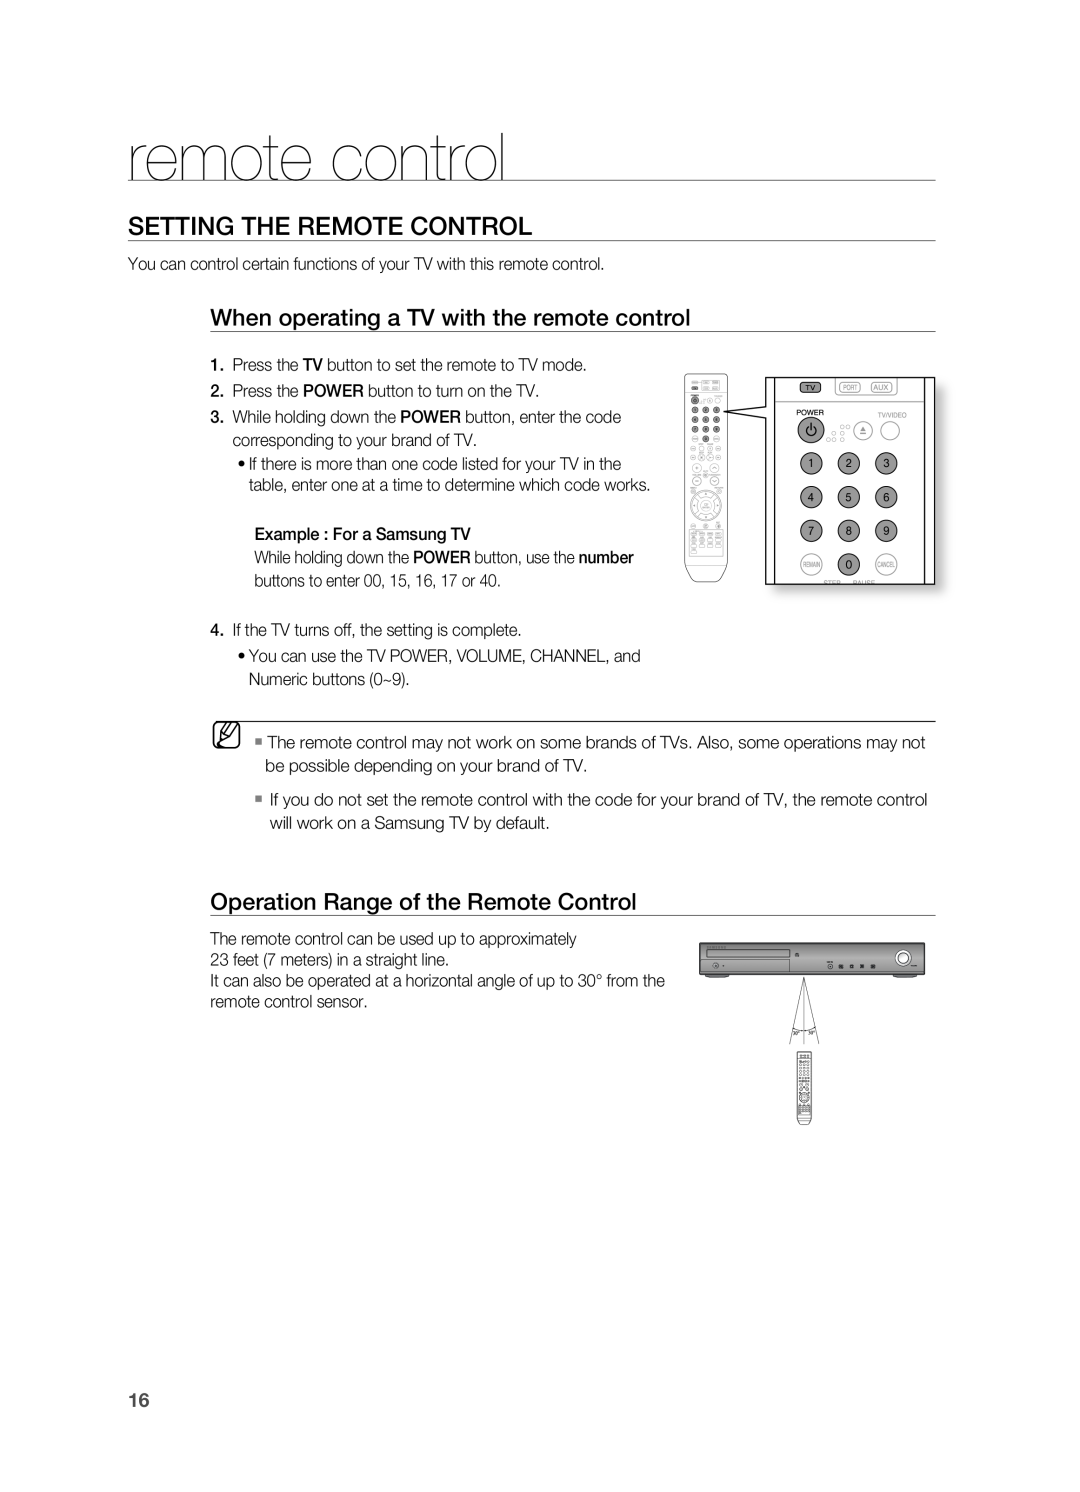 Samsung HT-TZ312 manual SEttinG tHE rEmOtE COntrOL, When operating a tV with the remote control 